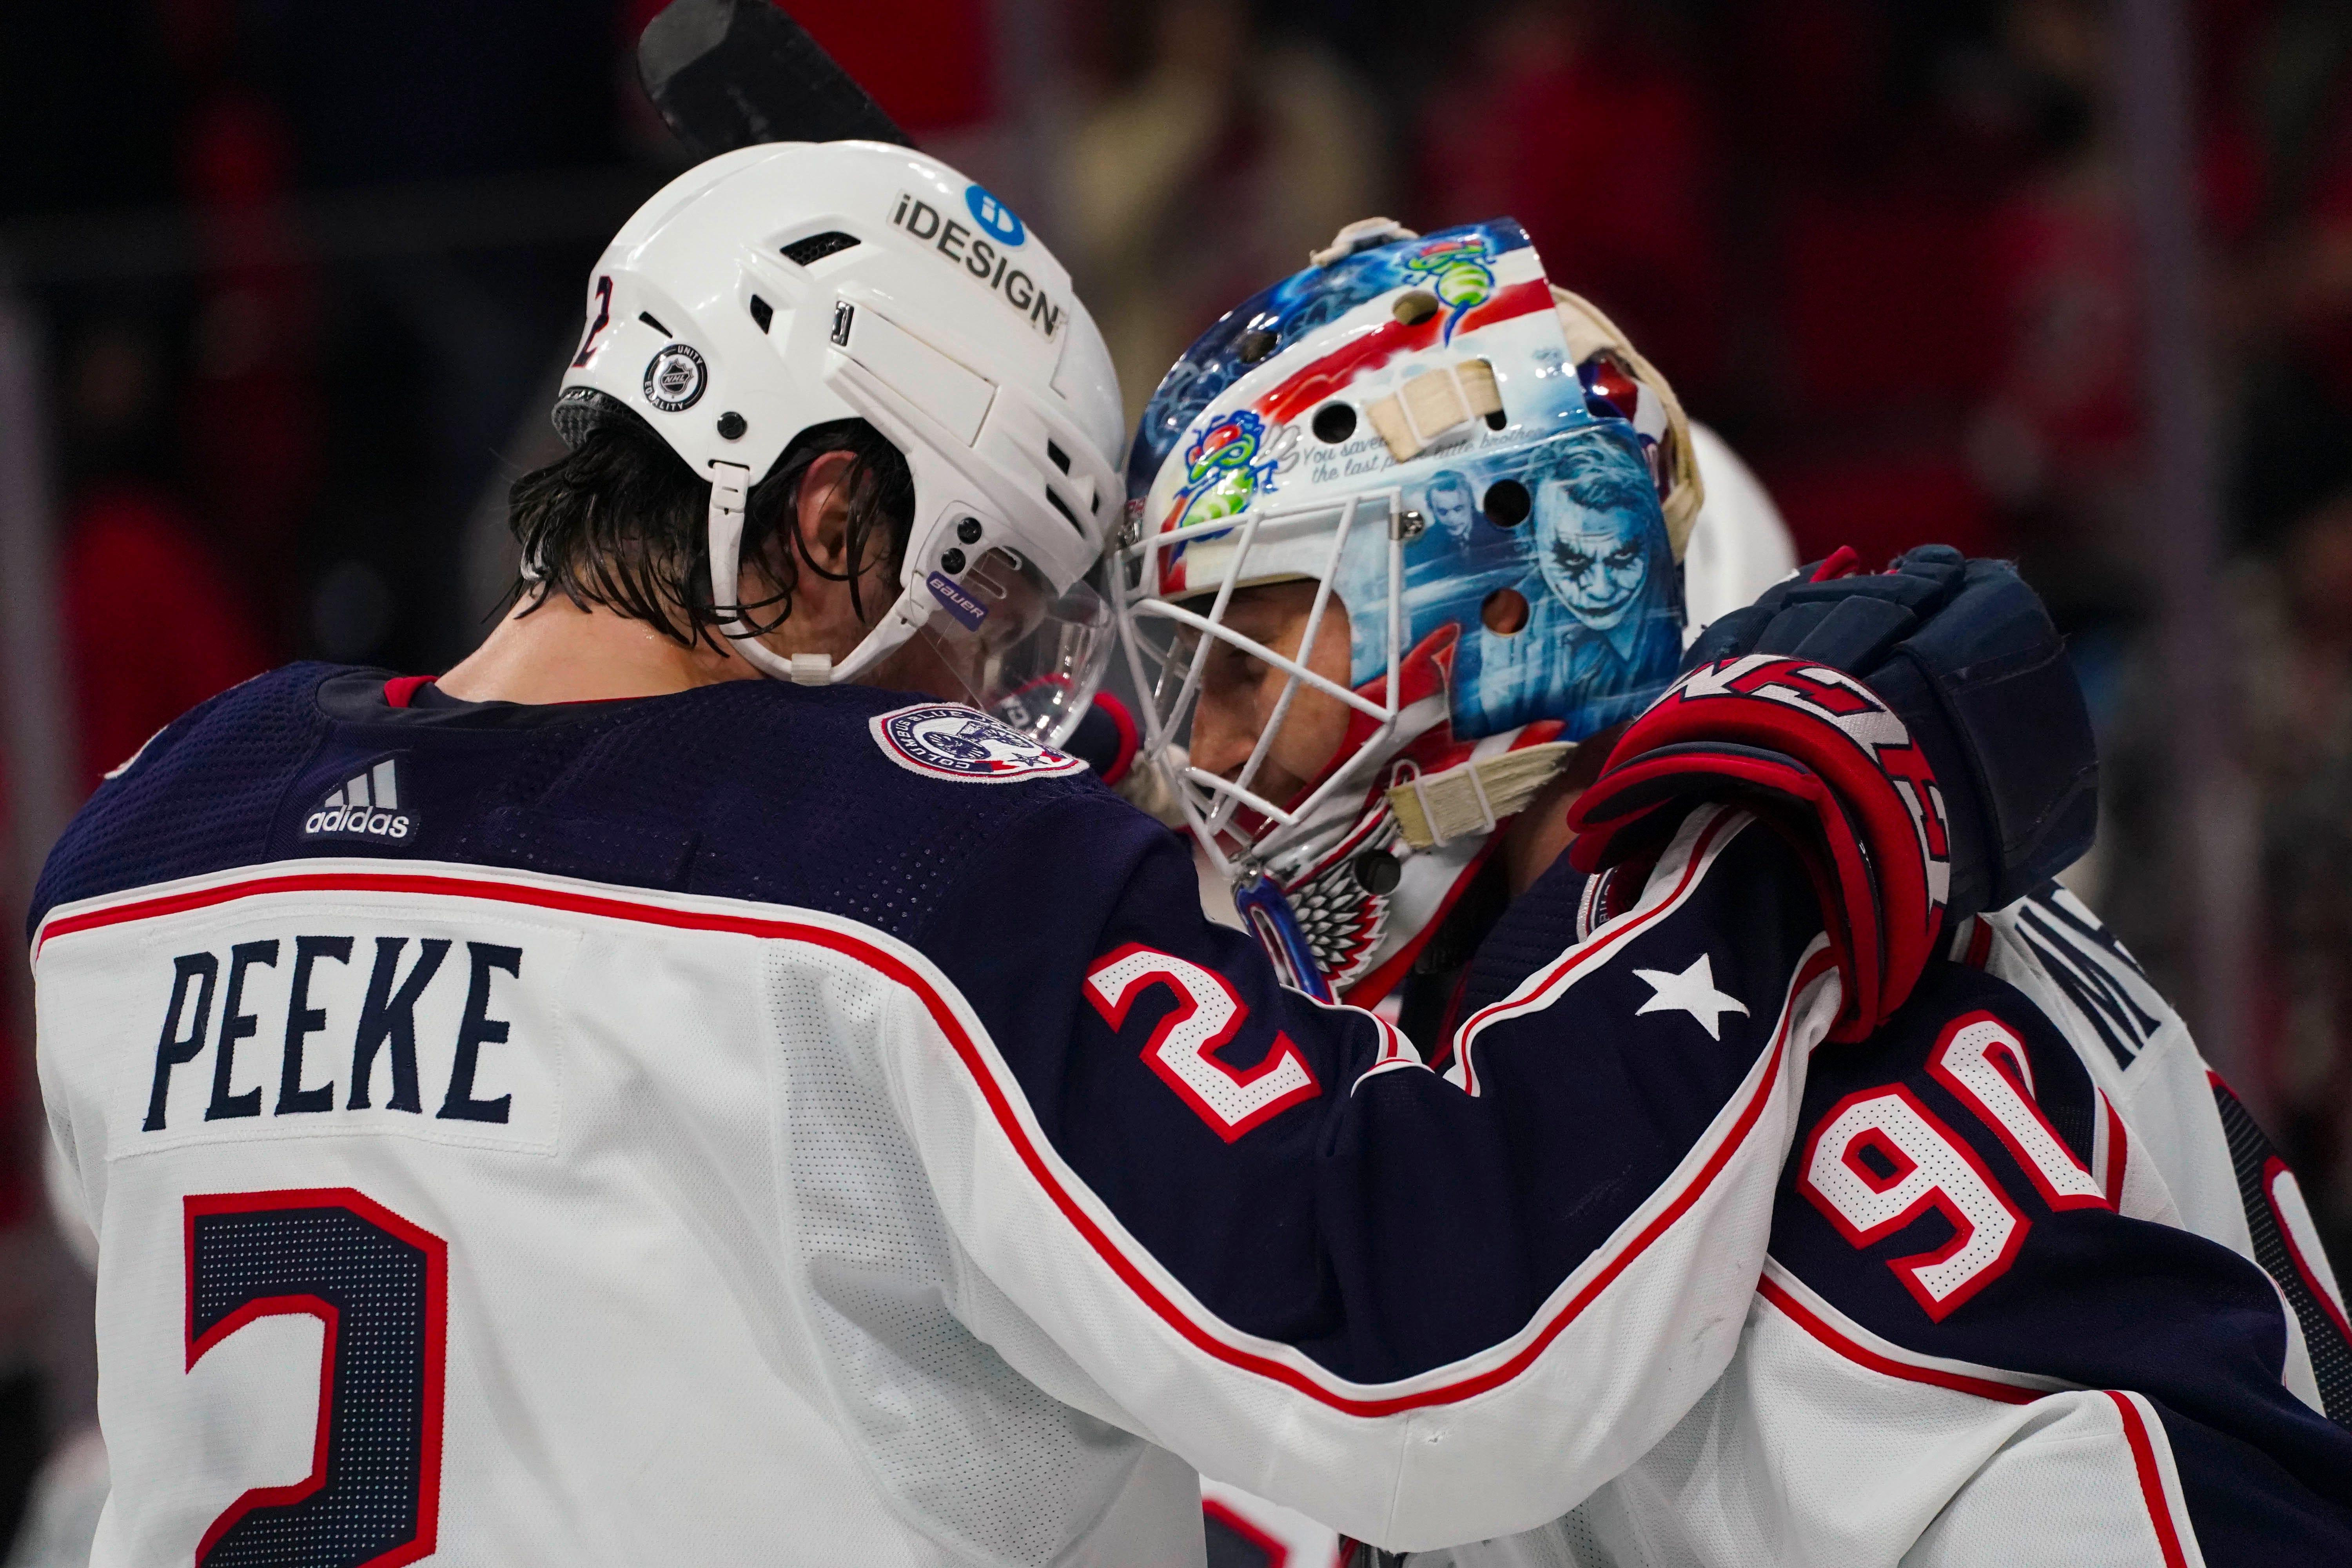 Sweet revenge: Blue Jackets rout Carolina Hurricanes in payback for New Year's nightmare